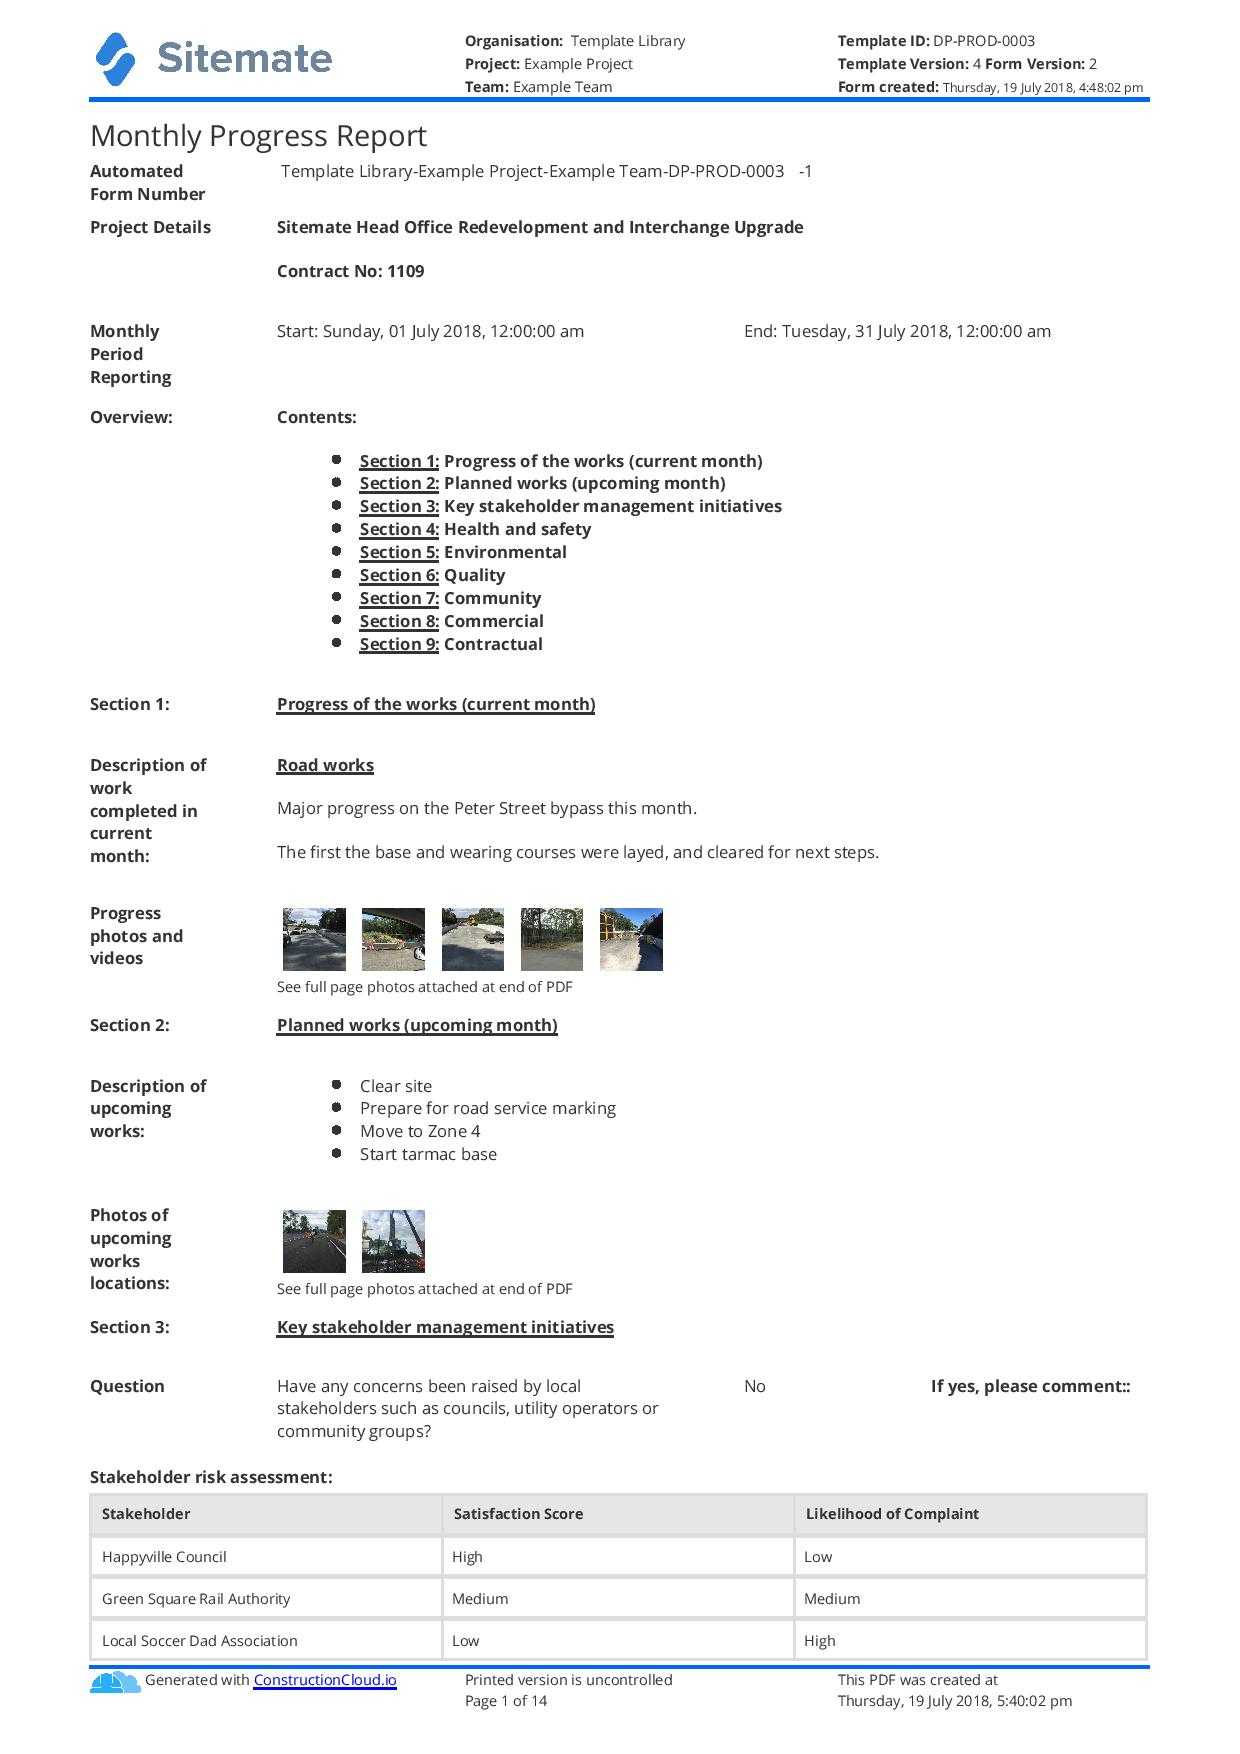 Monthly Construction Progress Report Template: Use This For Report Content Page Template